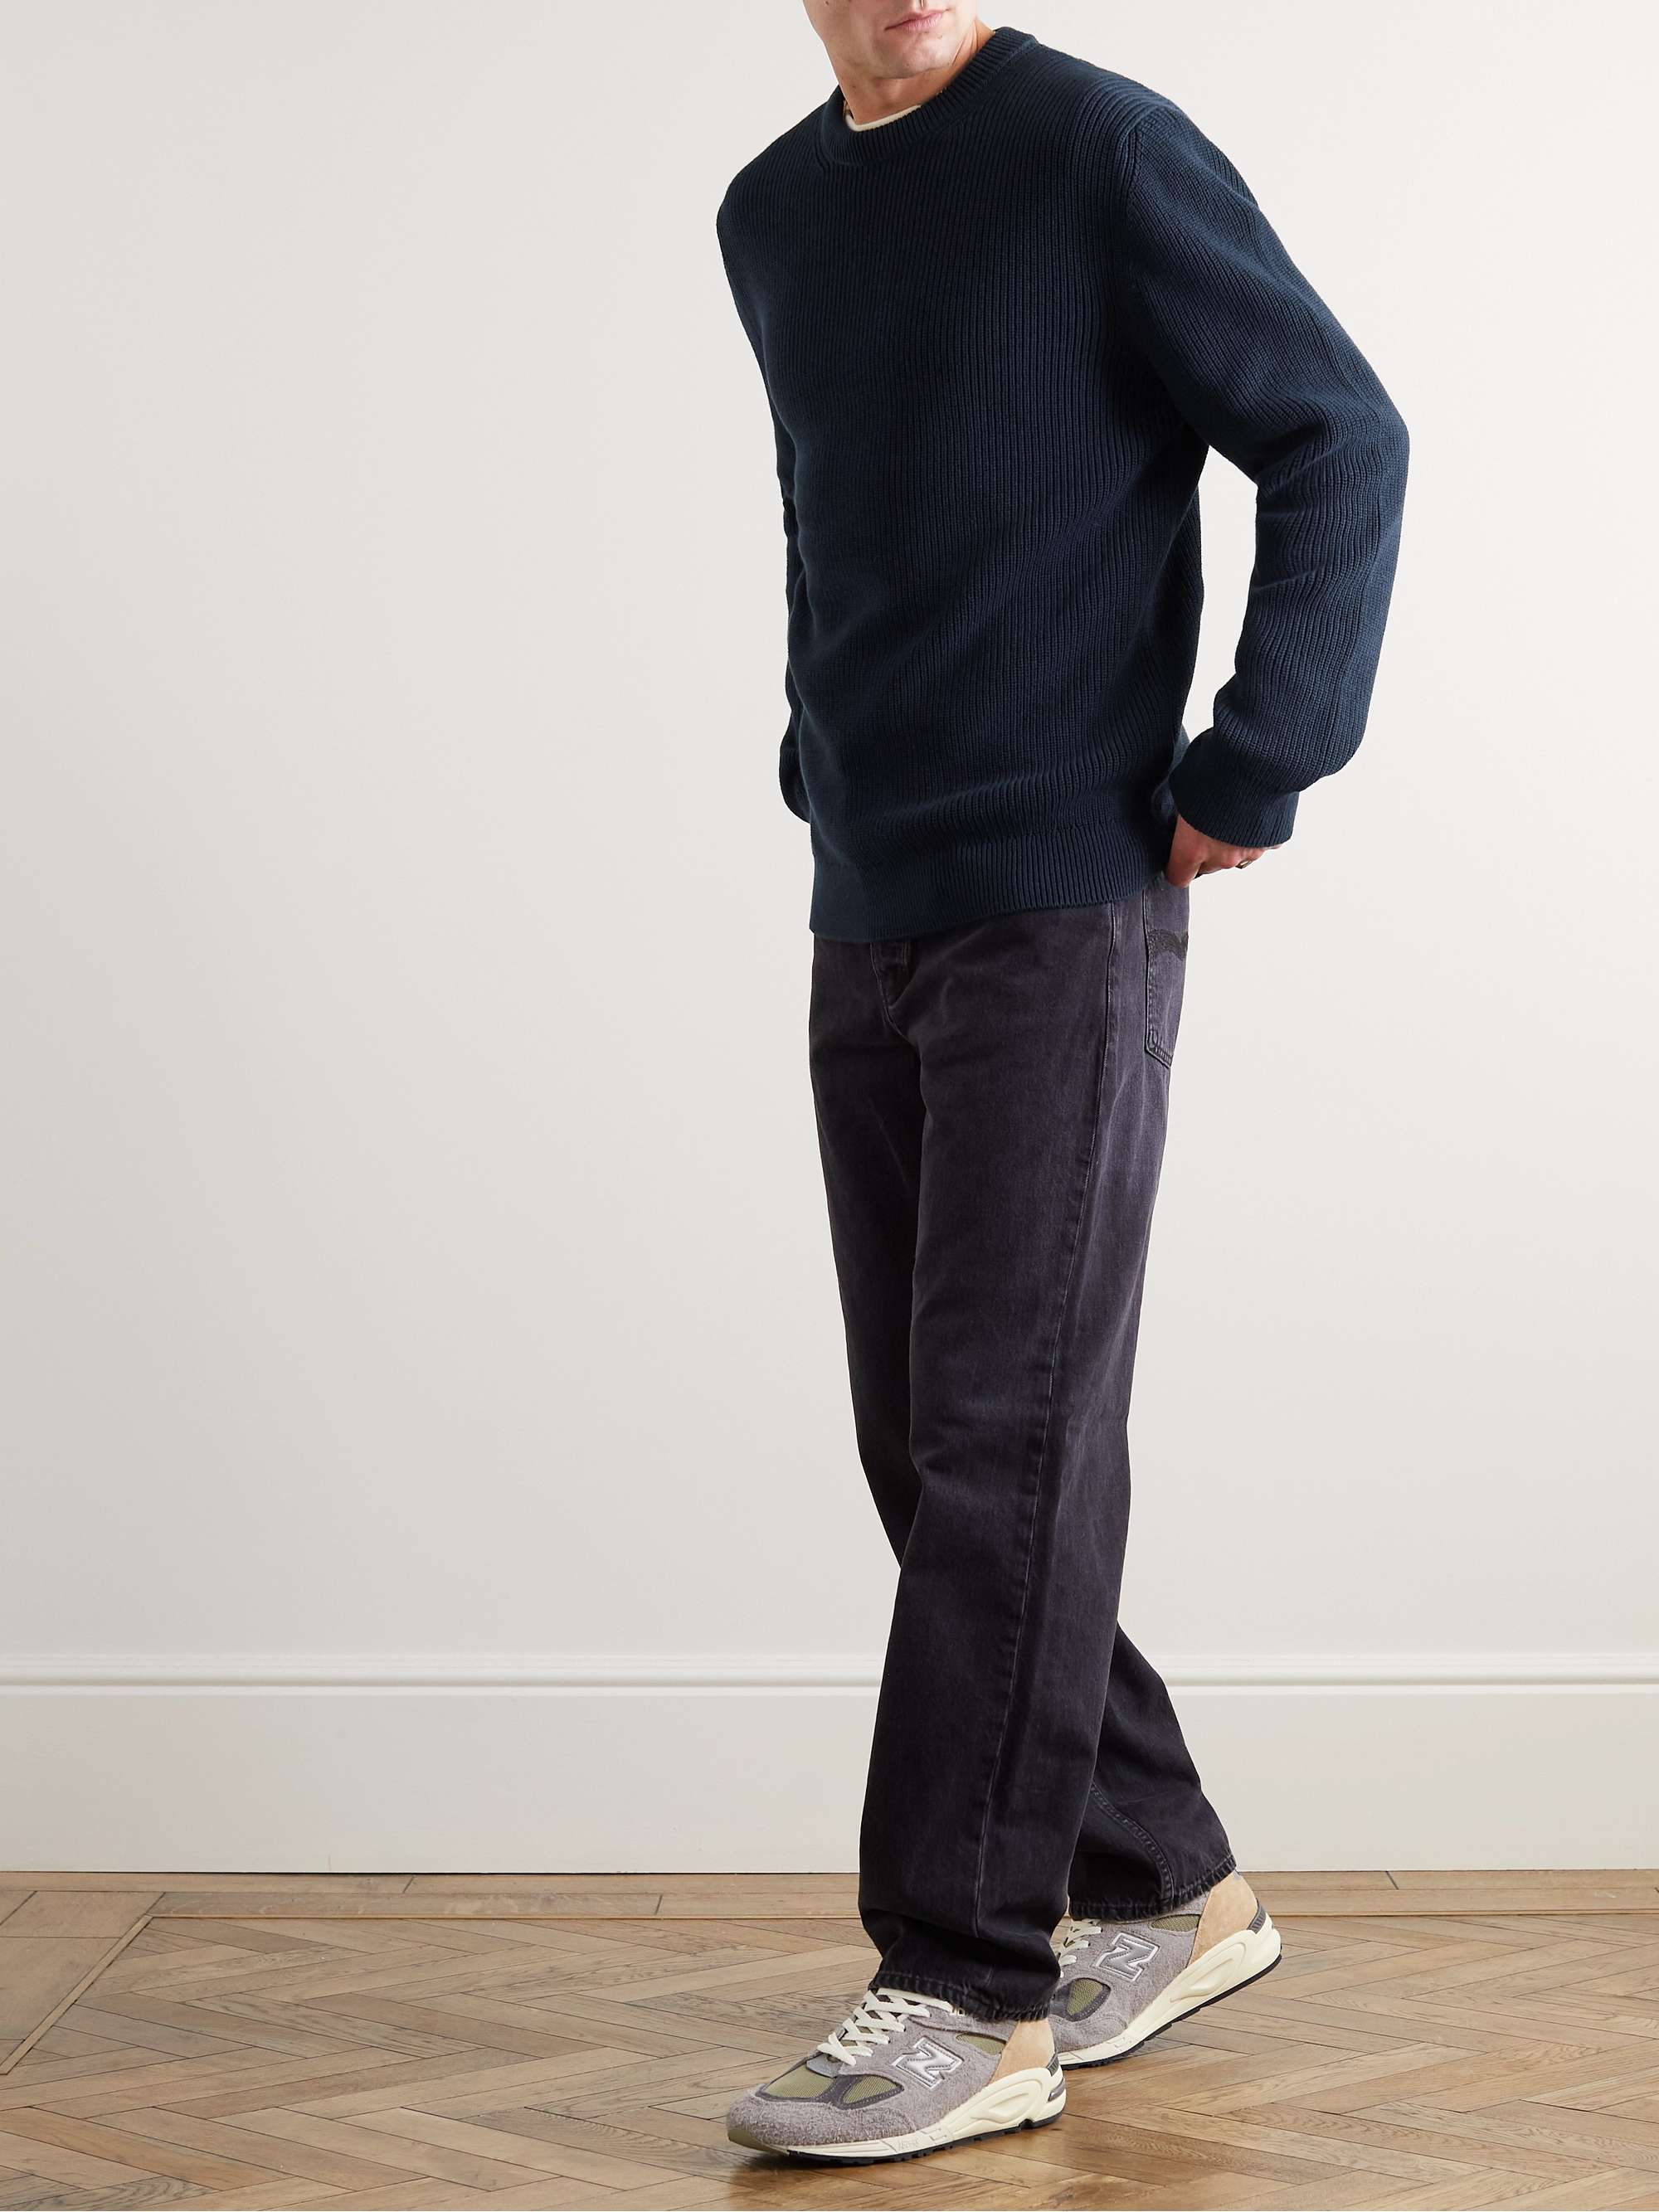 NUDIE JEANS August Ribbed Cotton Sweater | MR PORTER